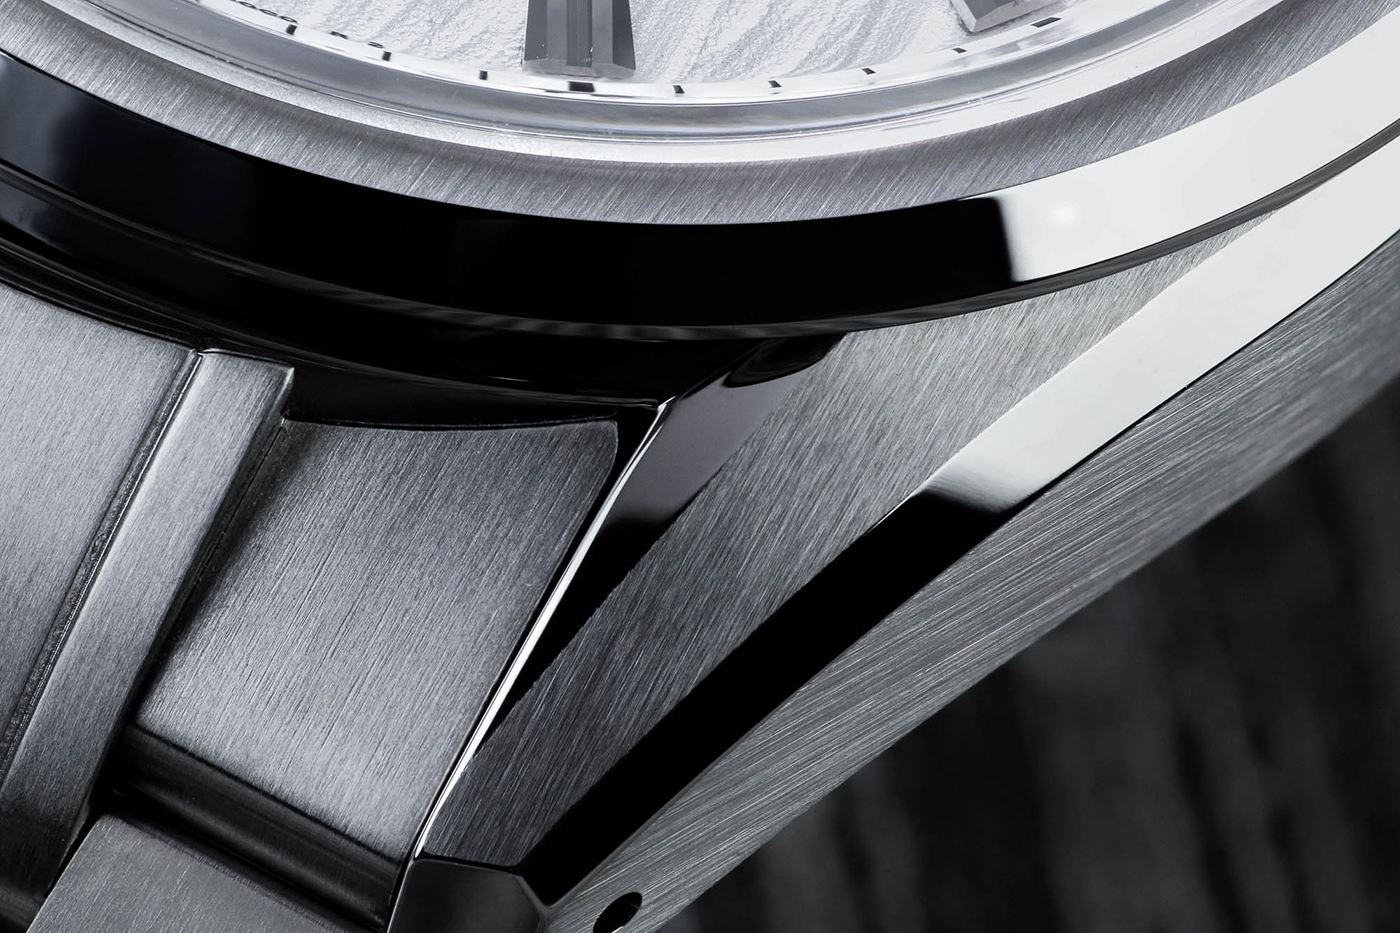 Grand Seiko Unveils SLGH005 Watch Inspired By Birch Trees | aBlogtoWatch